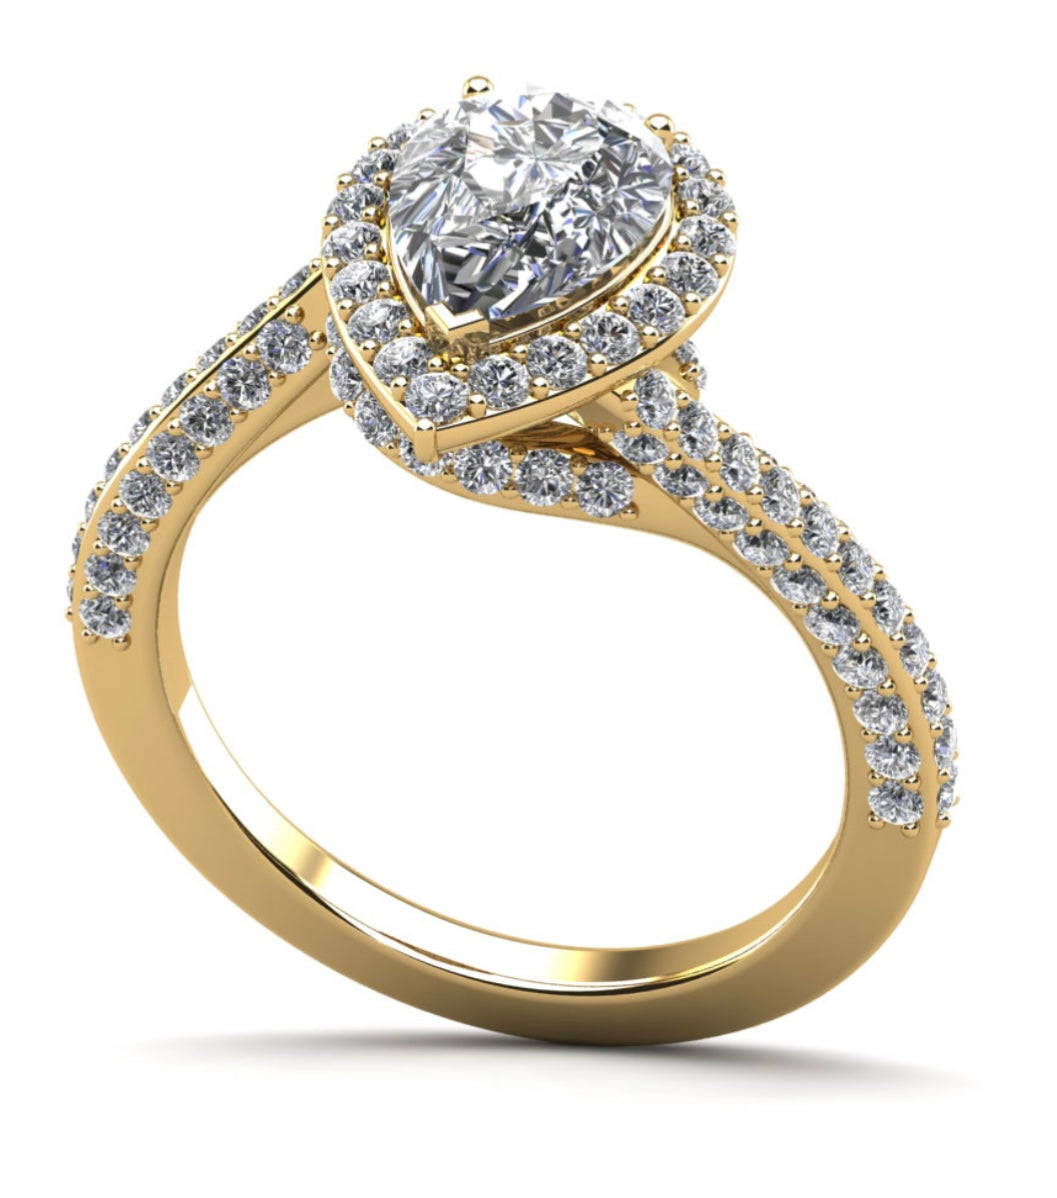 Exquisite Pear Shaped Halo Diamond Engagement Ring